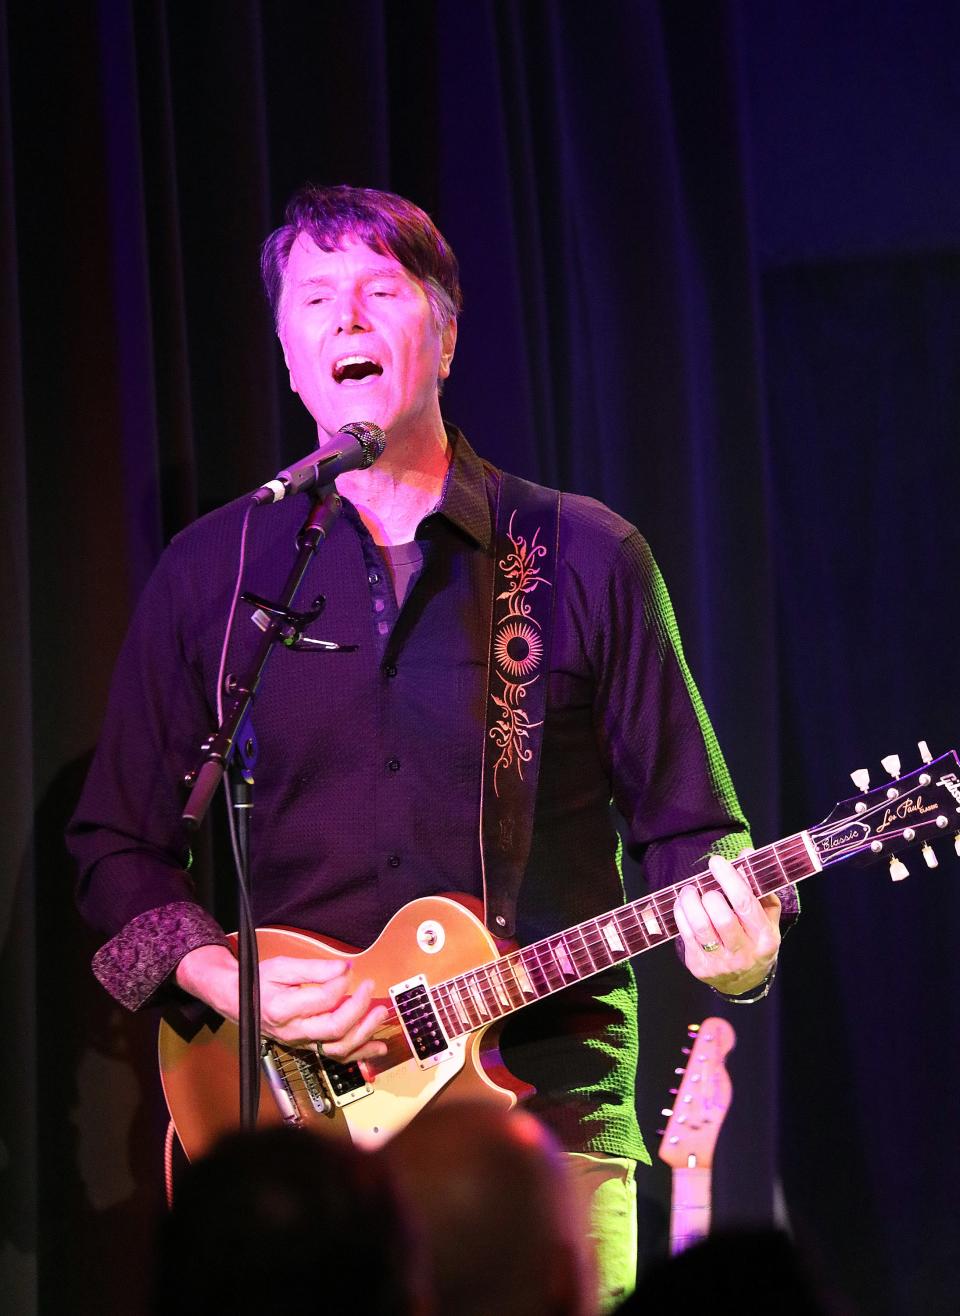 Kyle Warden plays guitar as The Rathbones reunite for a special concert at xBk Live, 1159 24th St. in Des Moines, on Friday, Oct. 27, to celebrate their 2023 induction into the Iowa Rock ‘n Roll Hall of Fame.